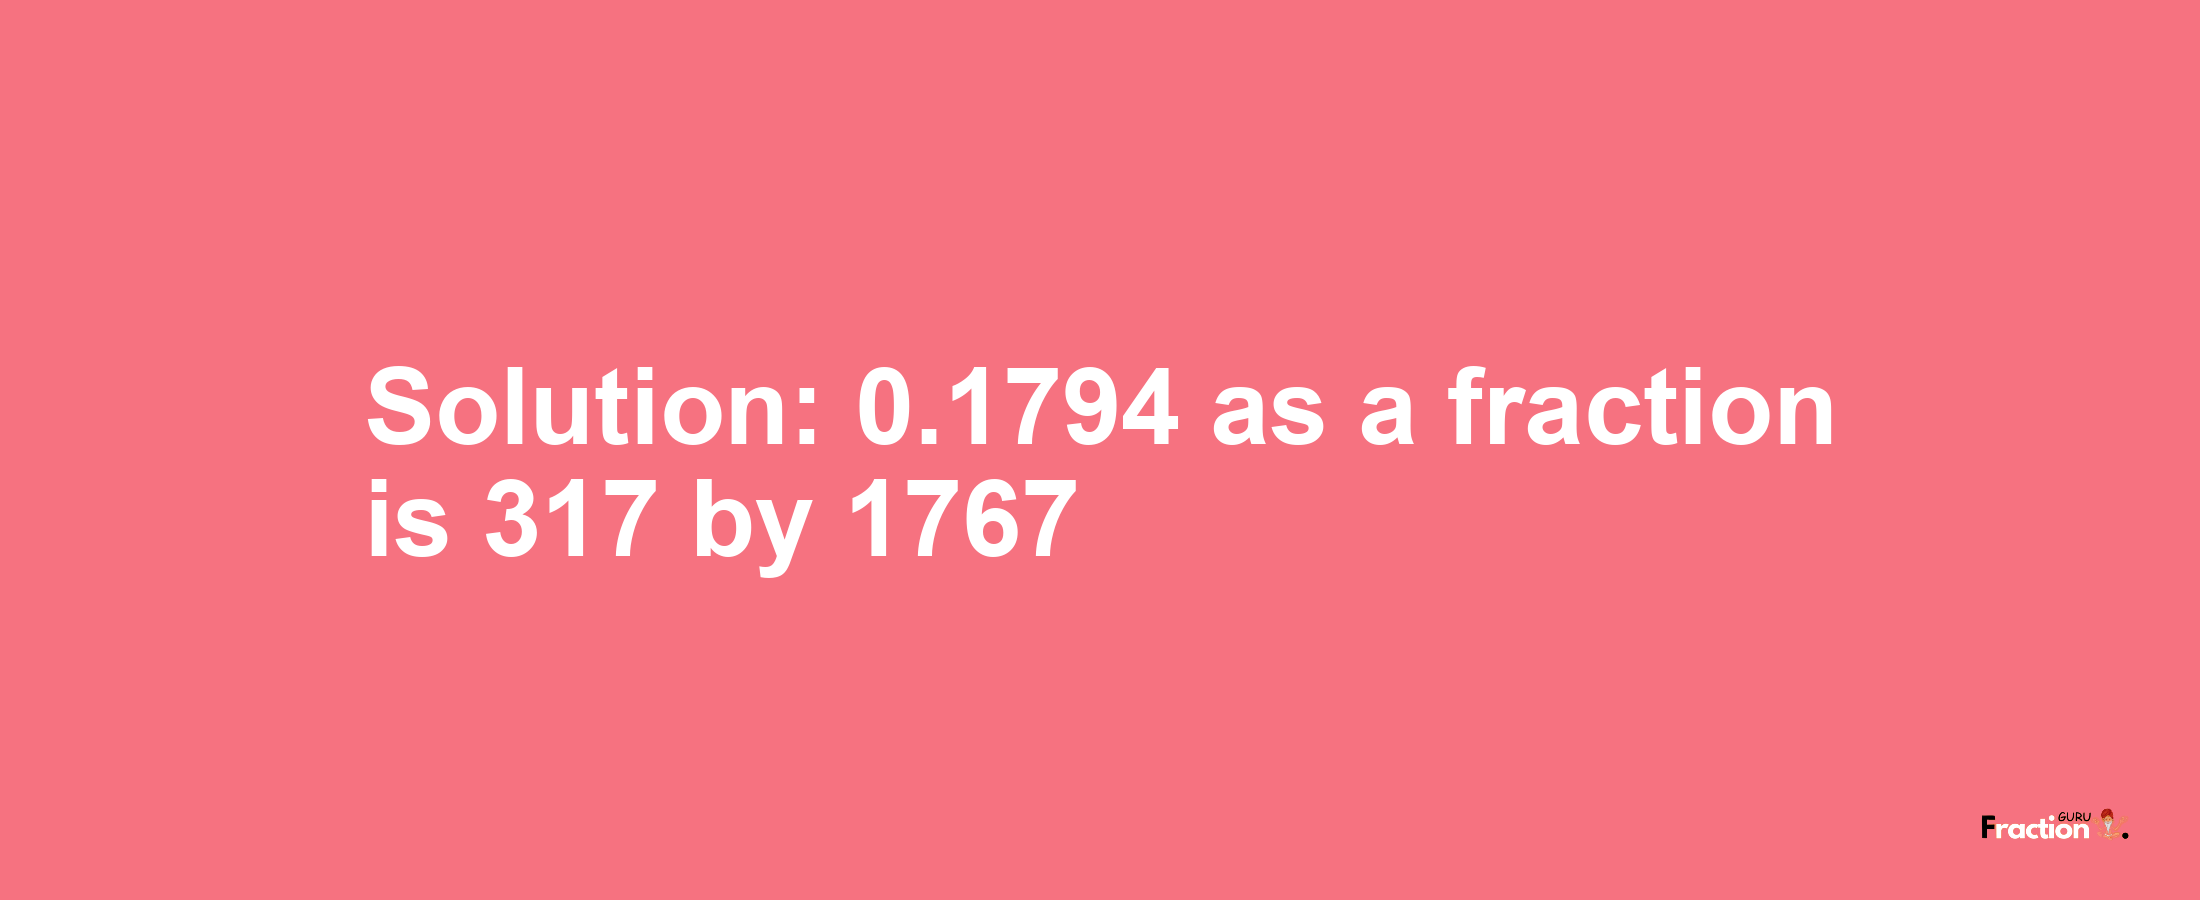 Solution:0.1794 as a fraction is 317/1767